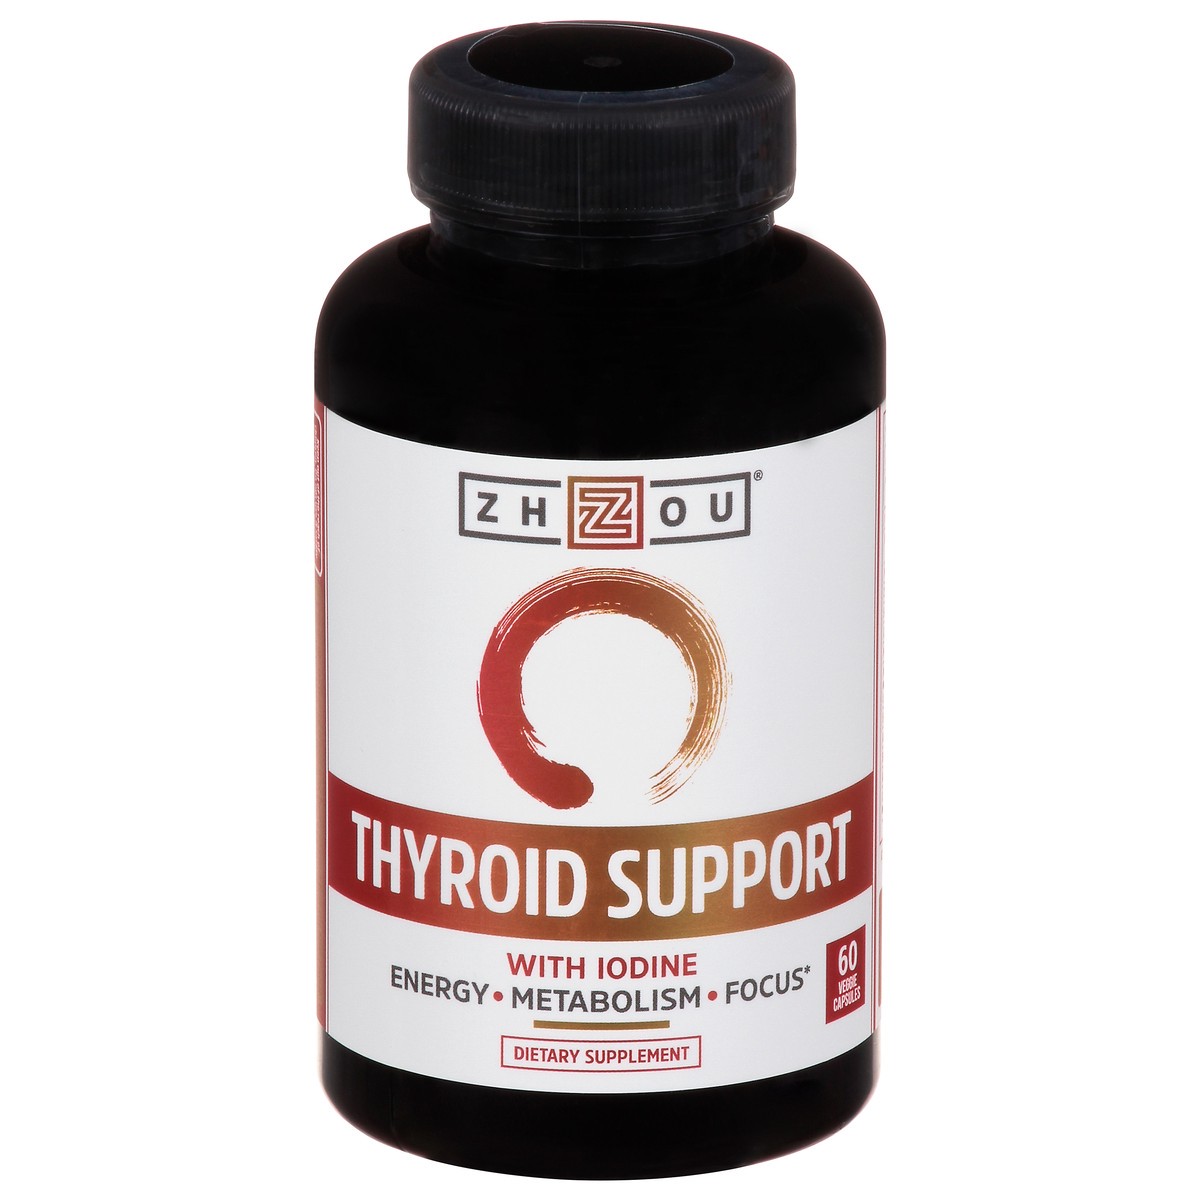 slide 1 of 9, Zhou Thyroid Support with Iodine Capsules 60 ea Bottle, 60 ct